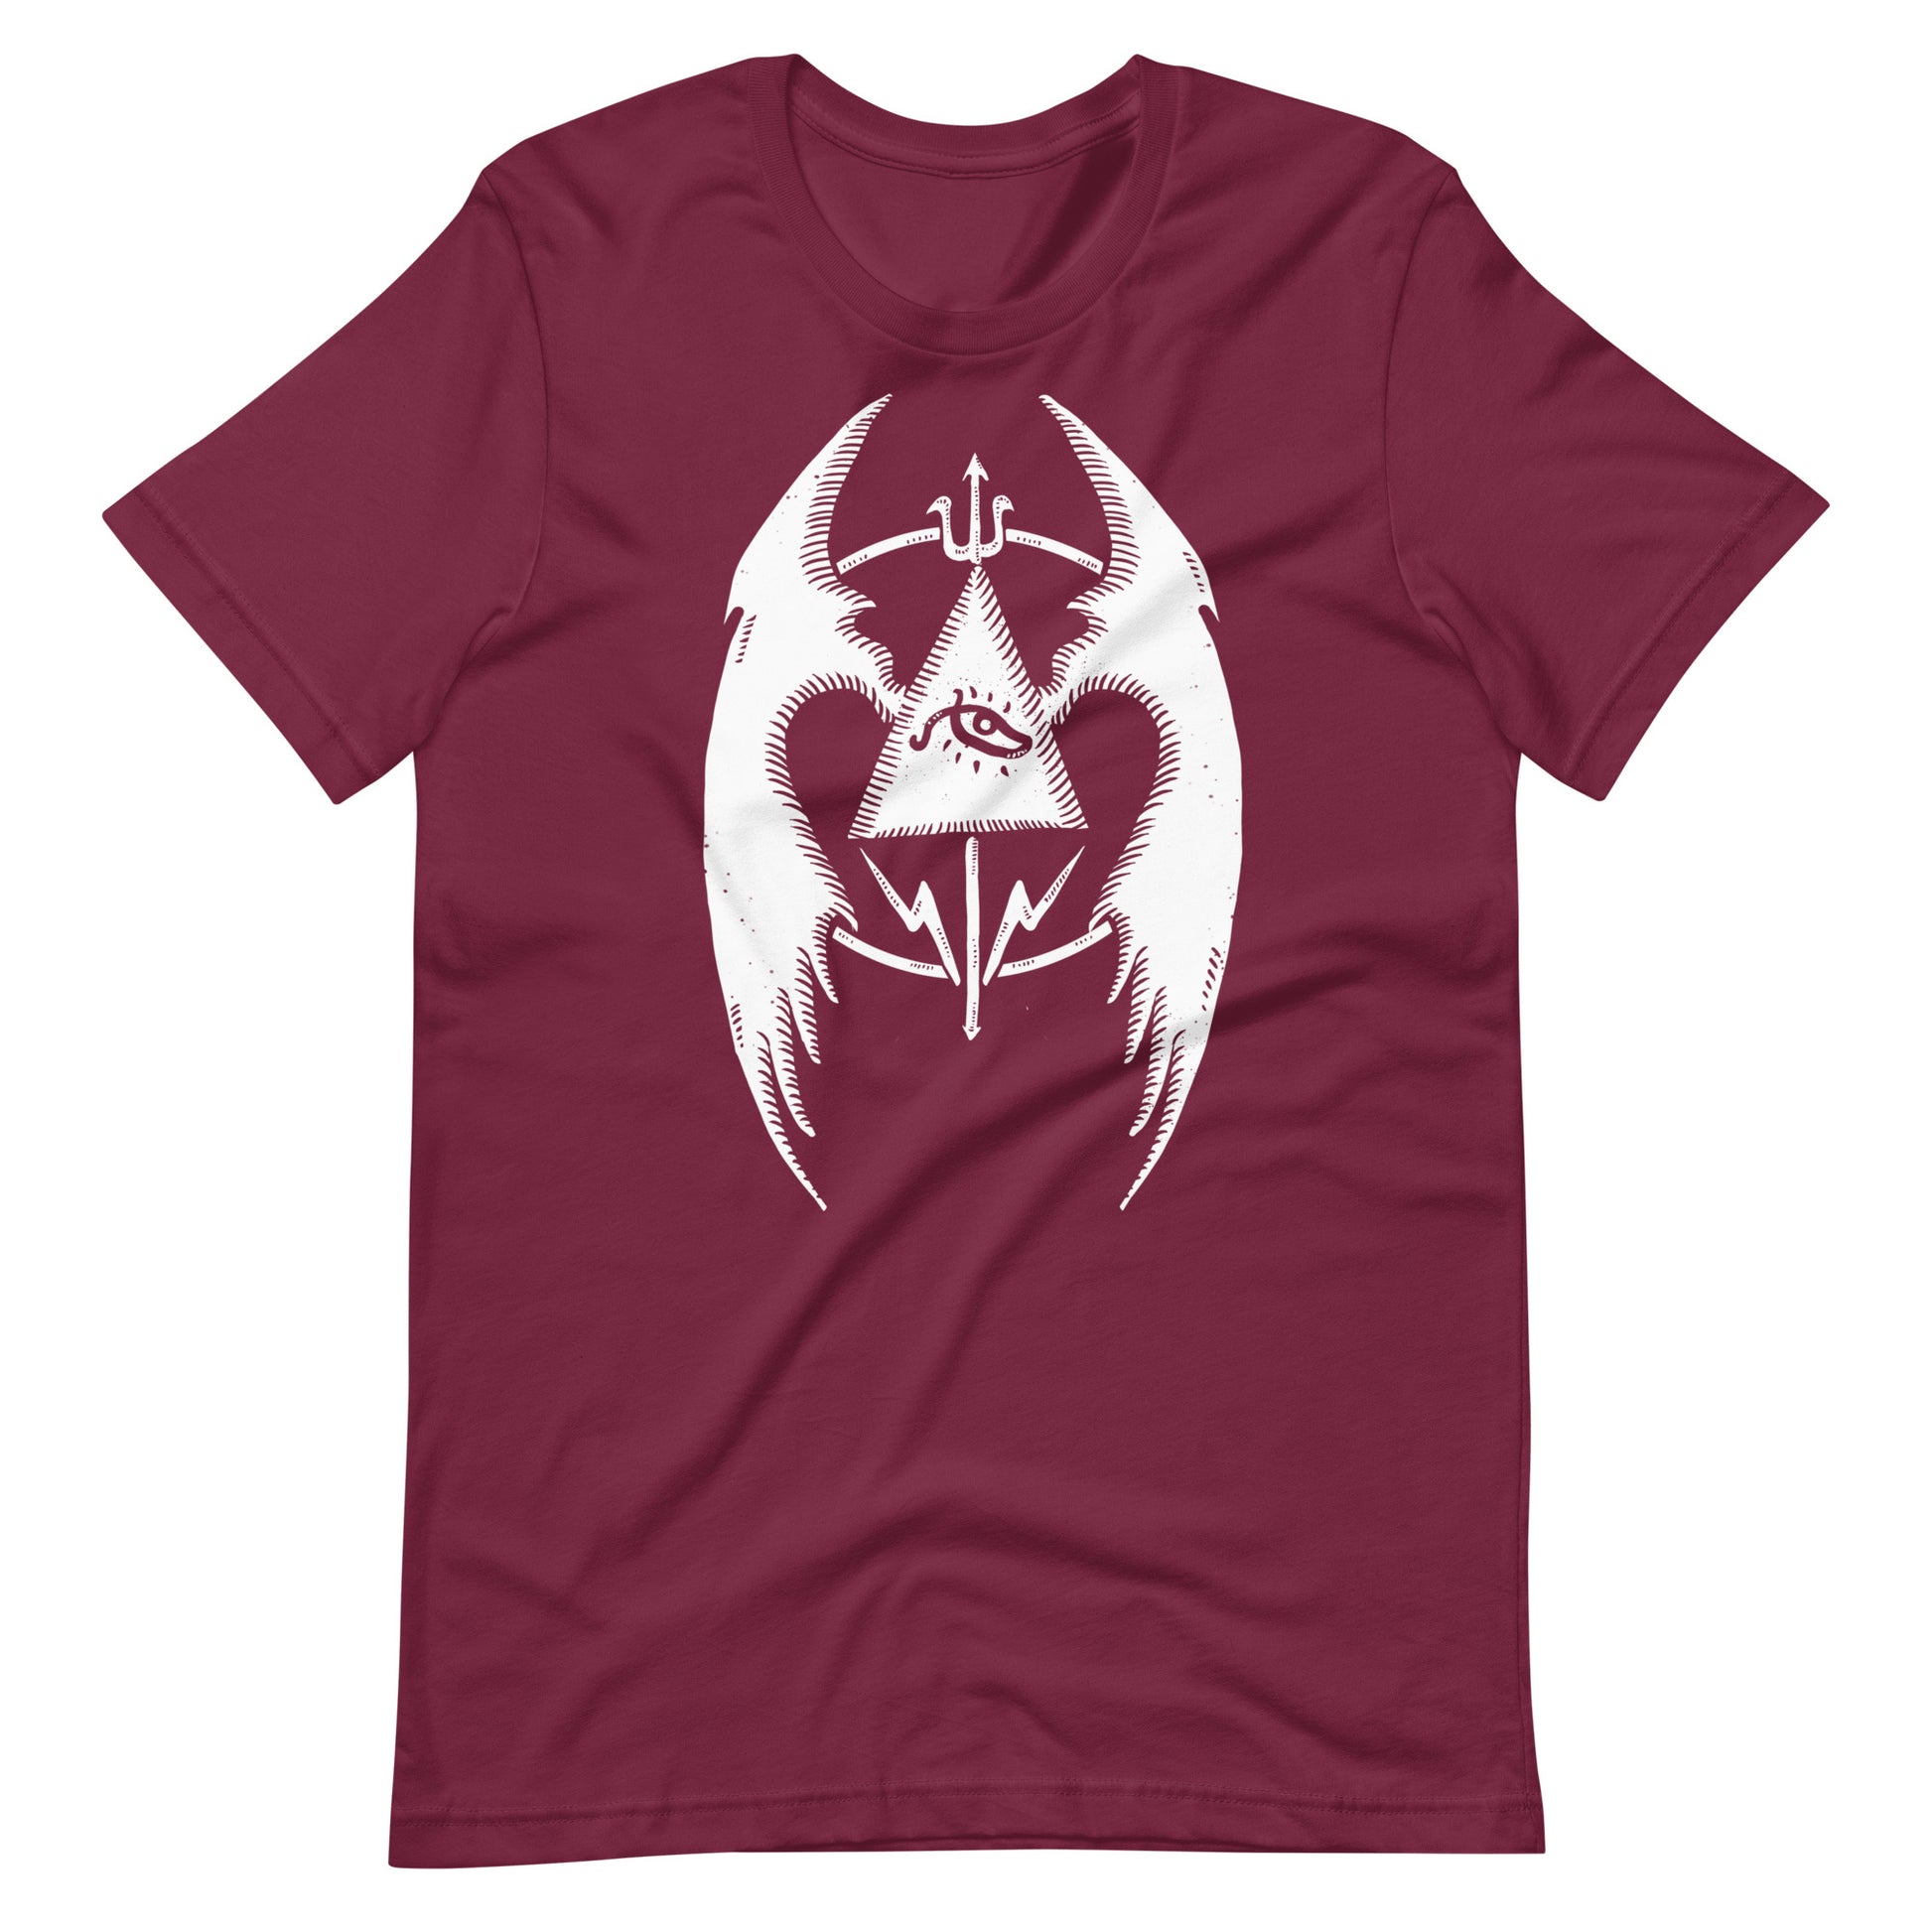 Fly 3 White - Men's t-shirt - Maroon Front